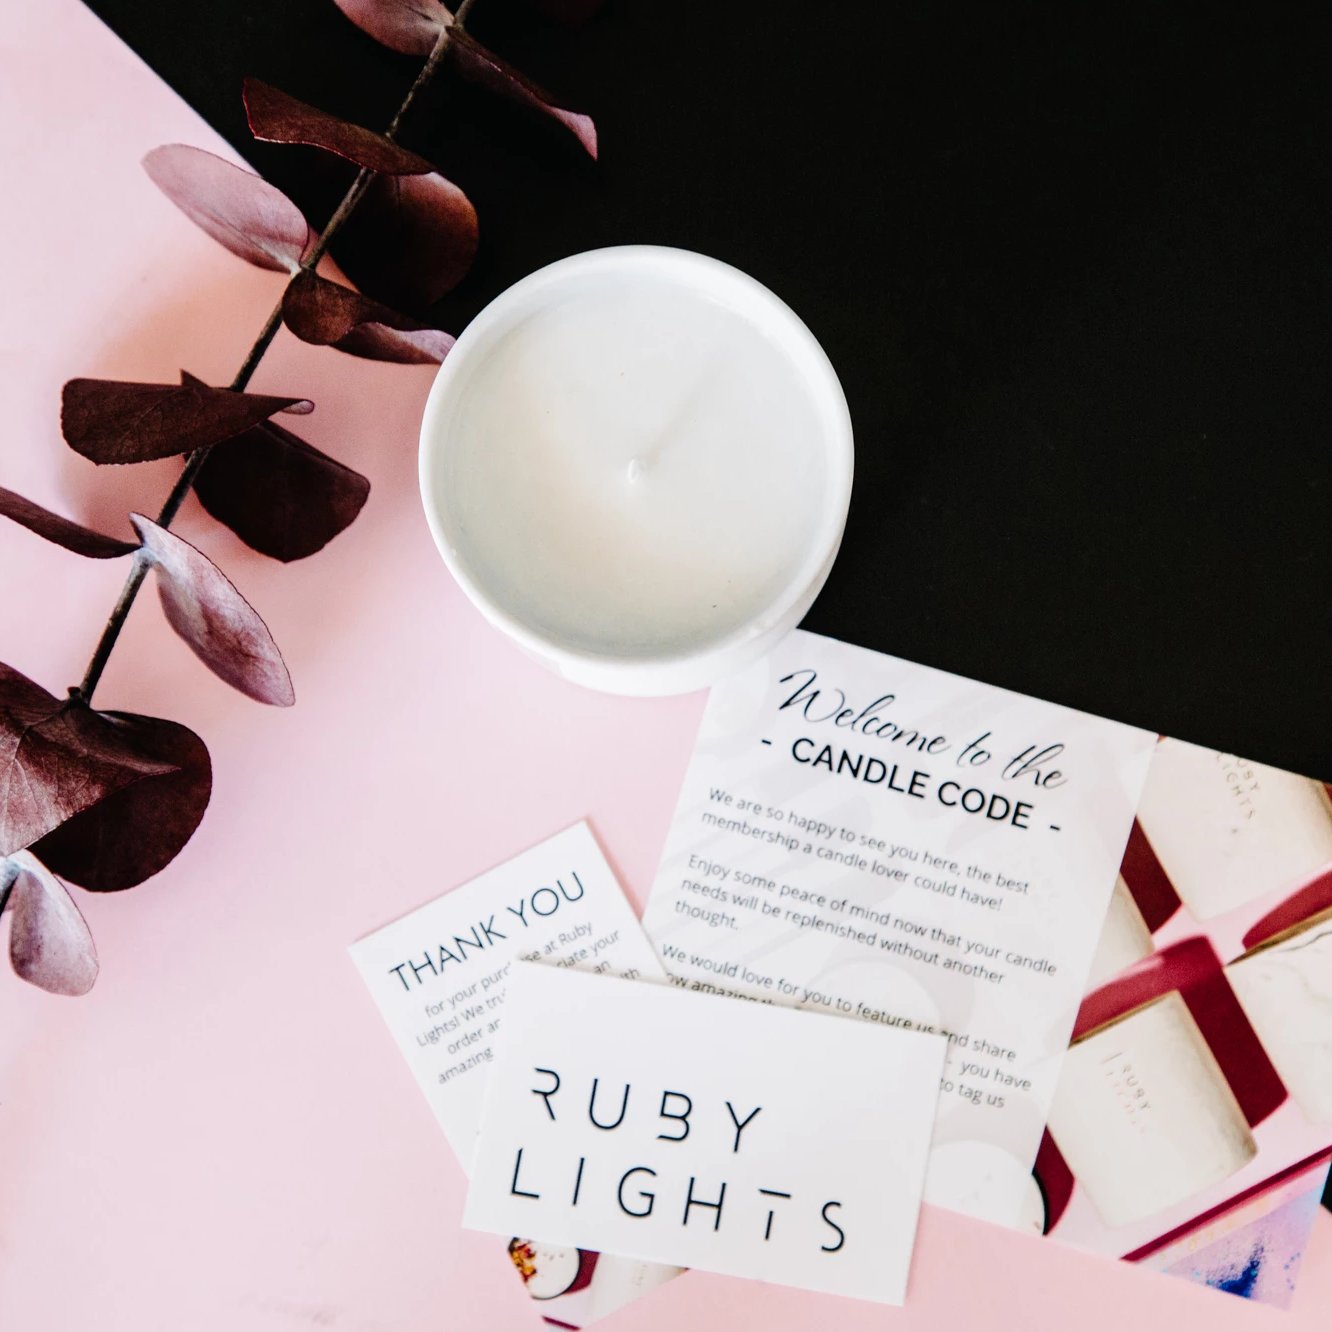 ruby lights candles the candle code subscription box